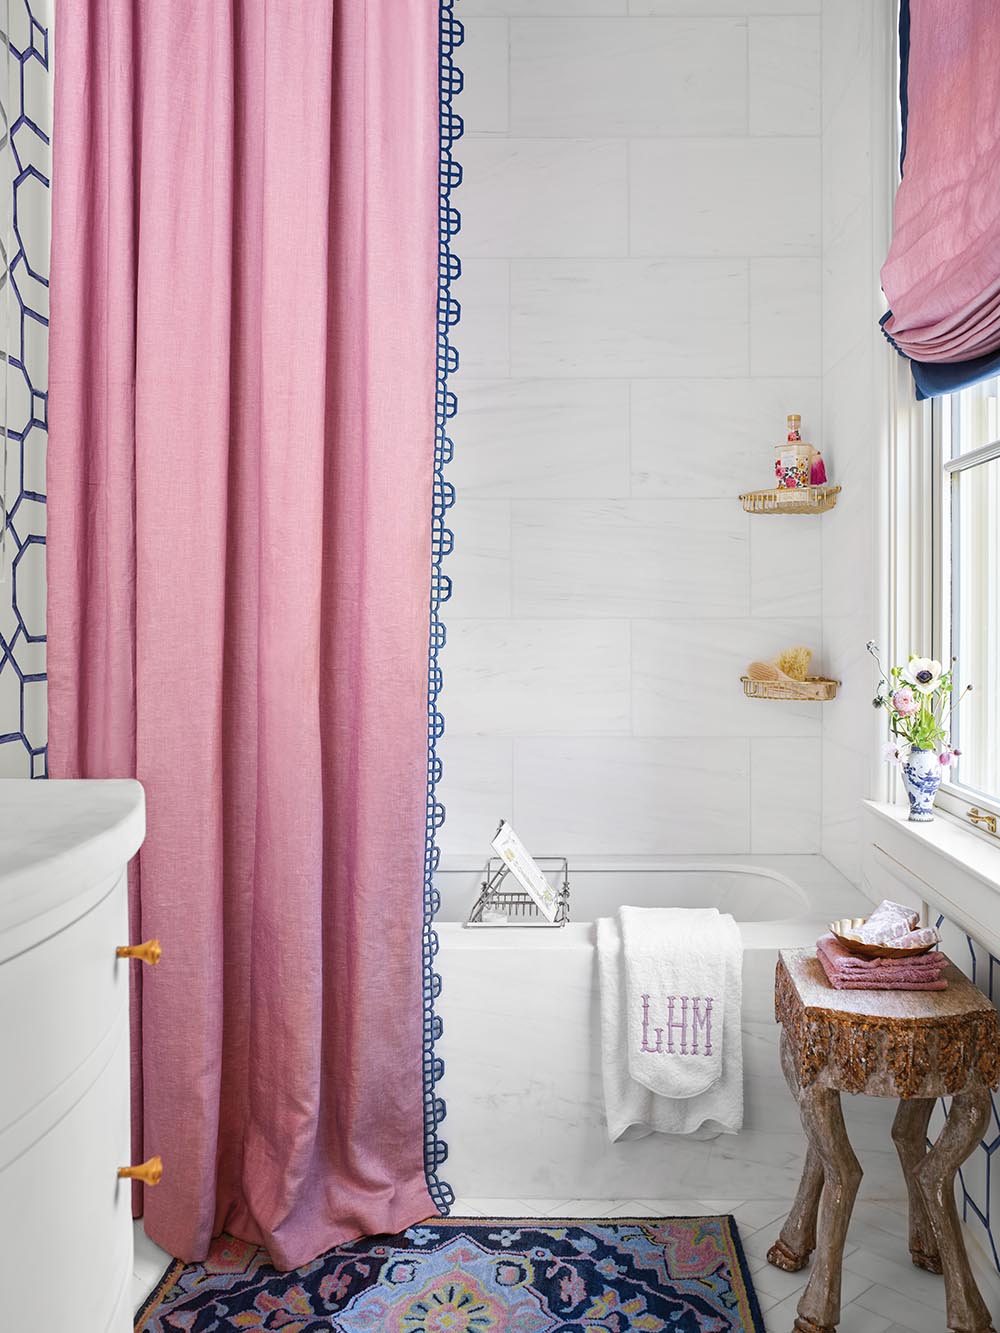 En suite bathroom designed by Lisa Mende with pink shower curtain and window covering. The trim on the leading edge of the curtains references back to the wallpaper pattern in the bath and on the bedroom ceiling.